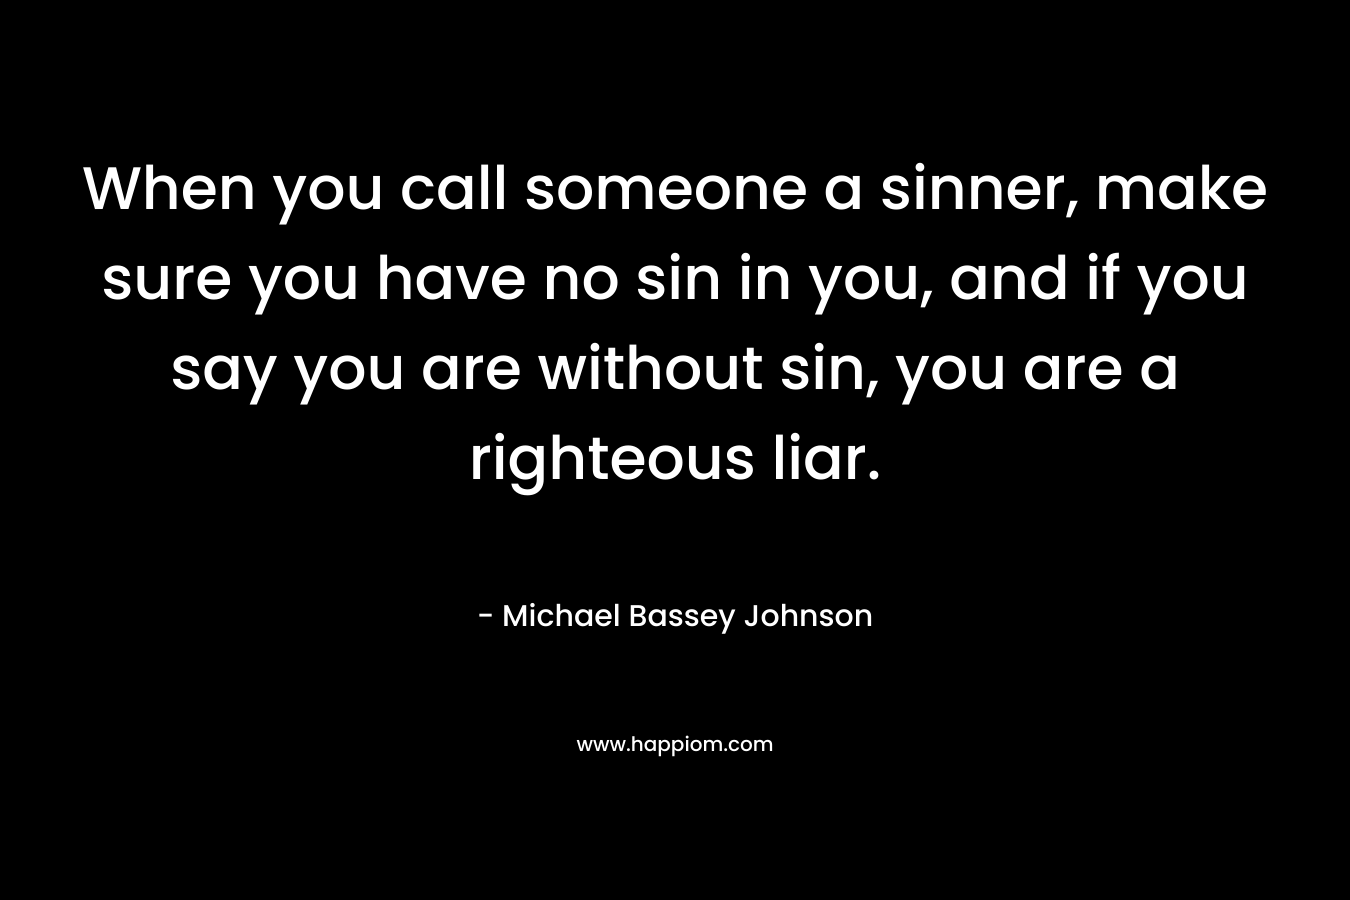 When you call someone a sinner, make sure you have no sin in you, and if you say you are without sin, you are a righteous liar. – Michael Bassey Johnson